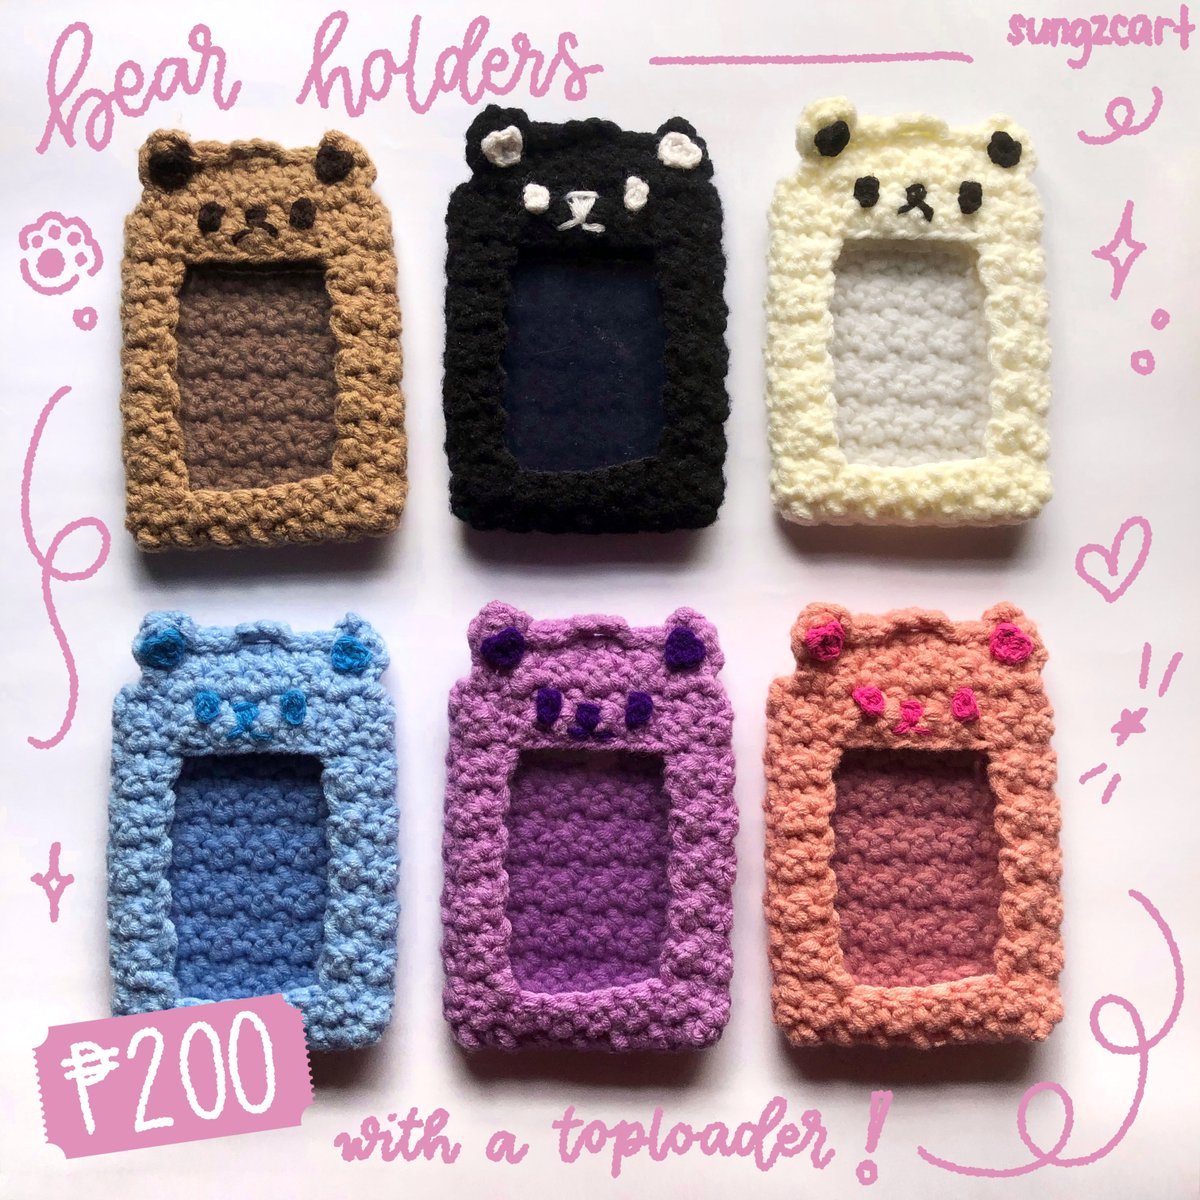 wts lfb ph  

꒰ crochet photocard holders 🧸 ꒱  
⟢ ₱200 each with a toploader and packing fee! 
𓂋 1 each color available
⟢ please read pinned for more deets

reply 'mine + color' to claim!  

t. cute bear pc card holder